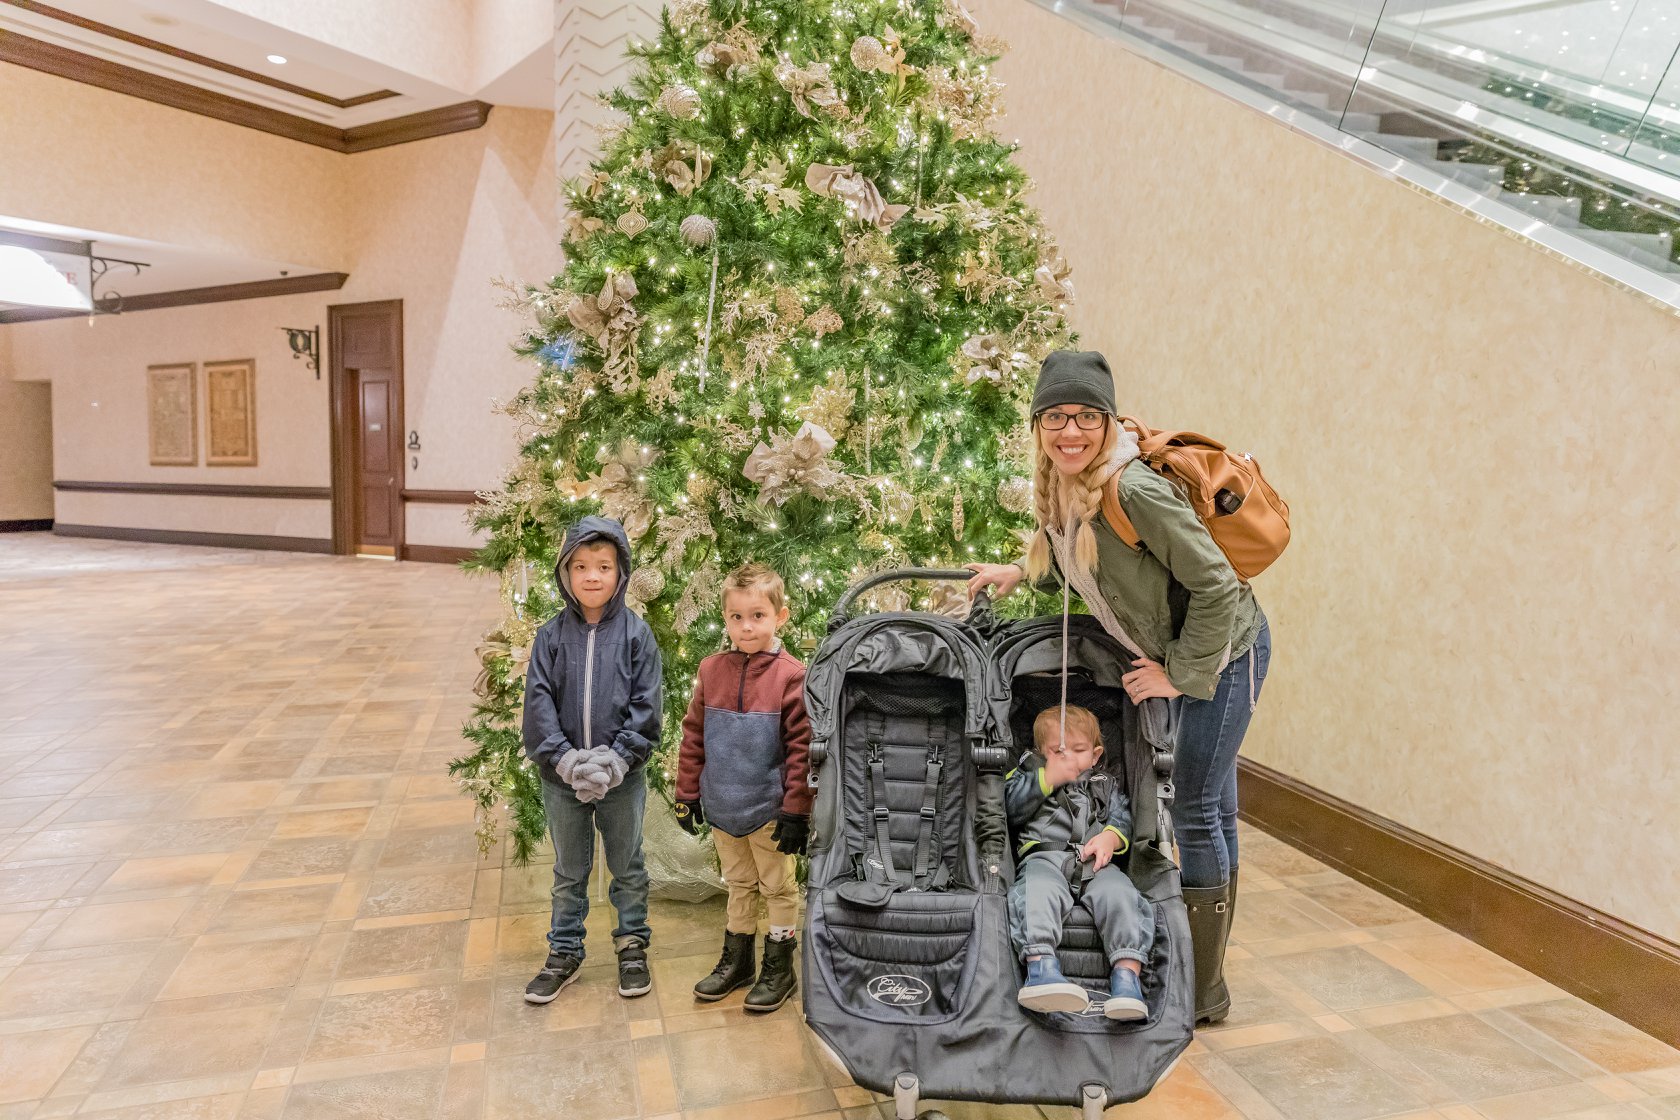 Gift Guide Tickets to Gaylor Palms ICE Everything you should know before going to ICE at Gaylord Palms!!! ICE! 2018 A Christmas Story Where to see Snow in Florida #gaylordpalmsice #icegaylord #gaylordpalms